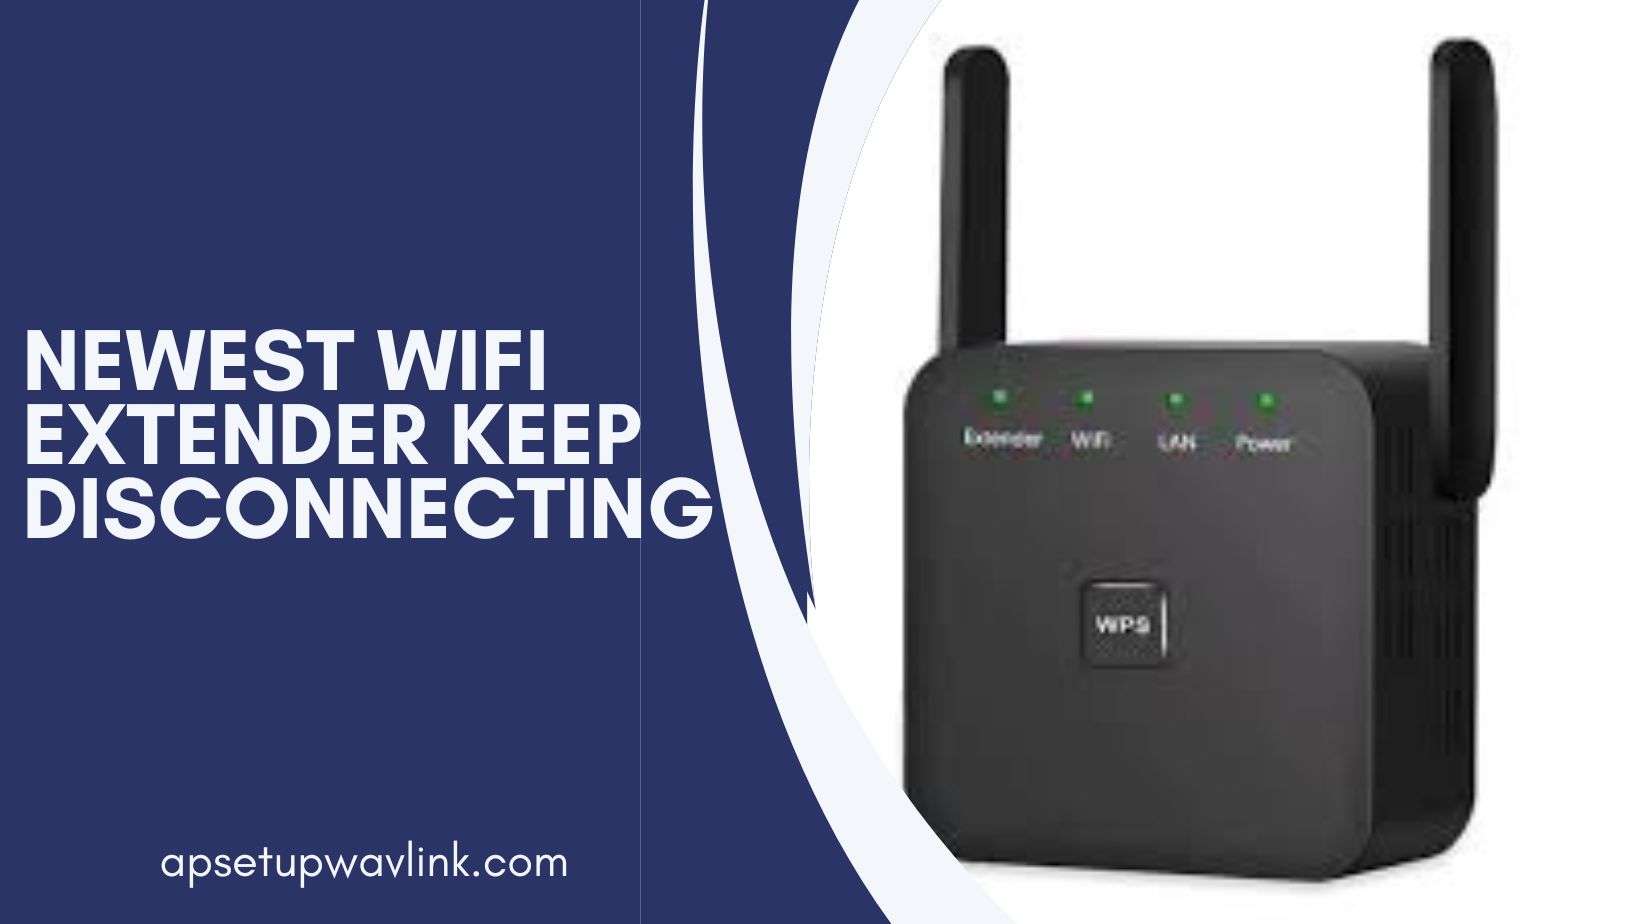 You are currently viewing Newest WiFi Extender keep disconnecting how to fix it